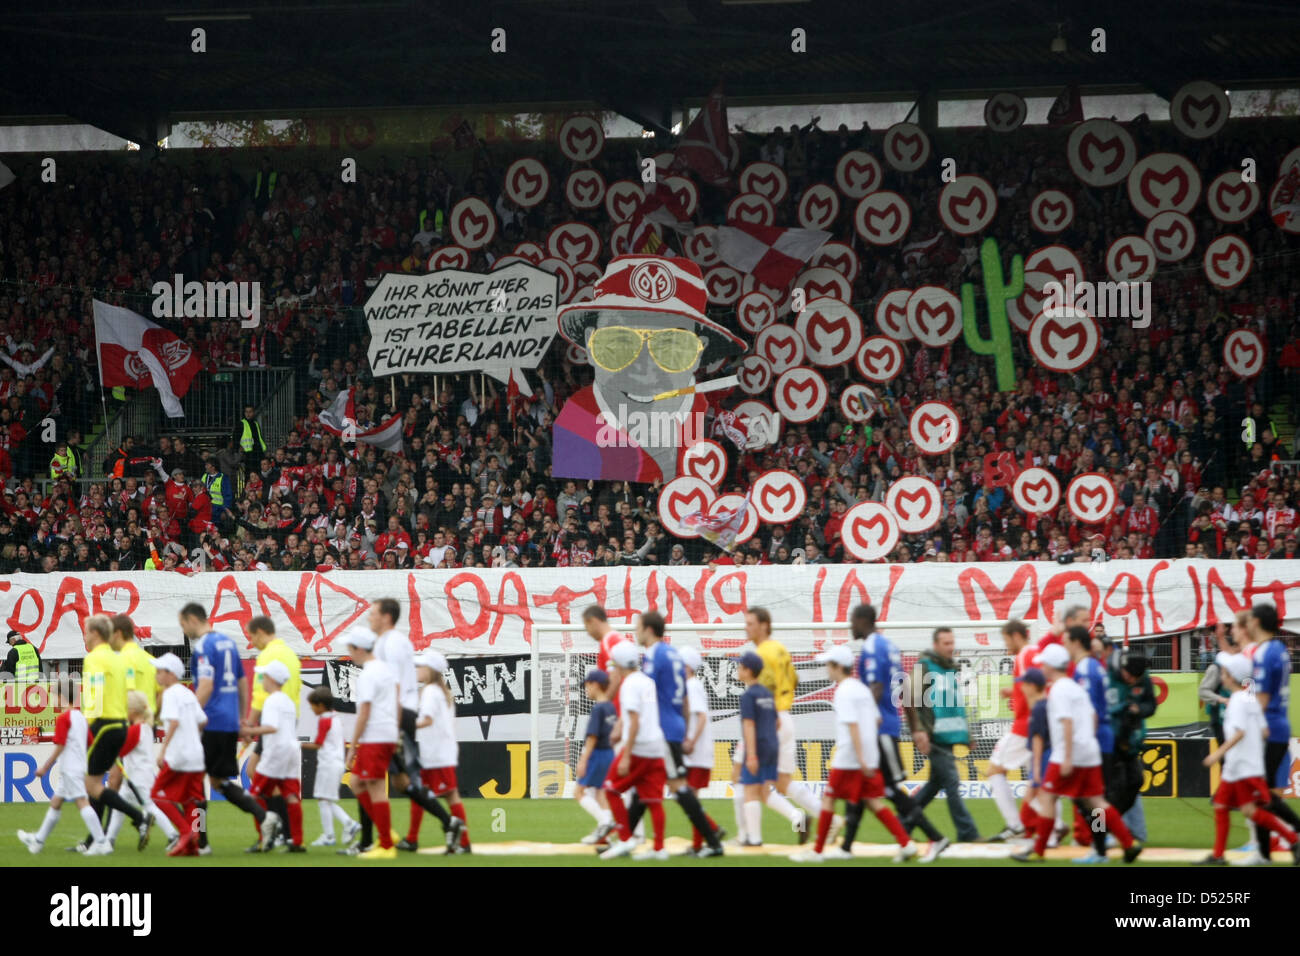 Mainz Fans Demonstrate Their Own Take On The Fear And Loathing In